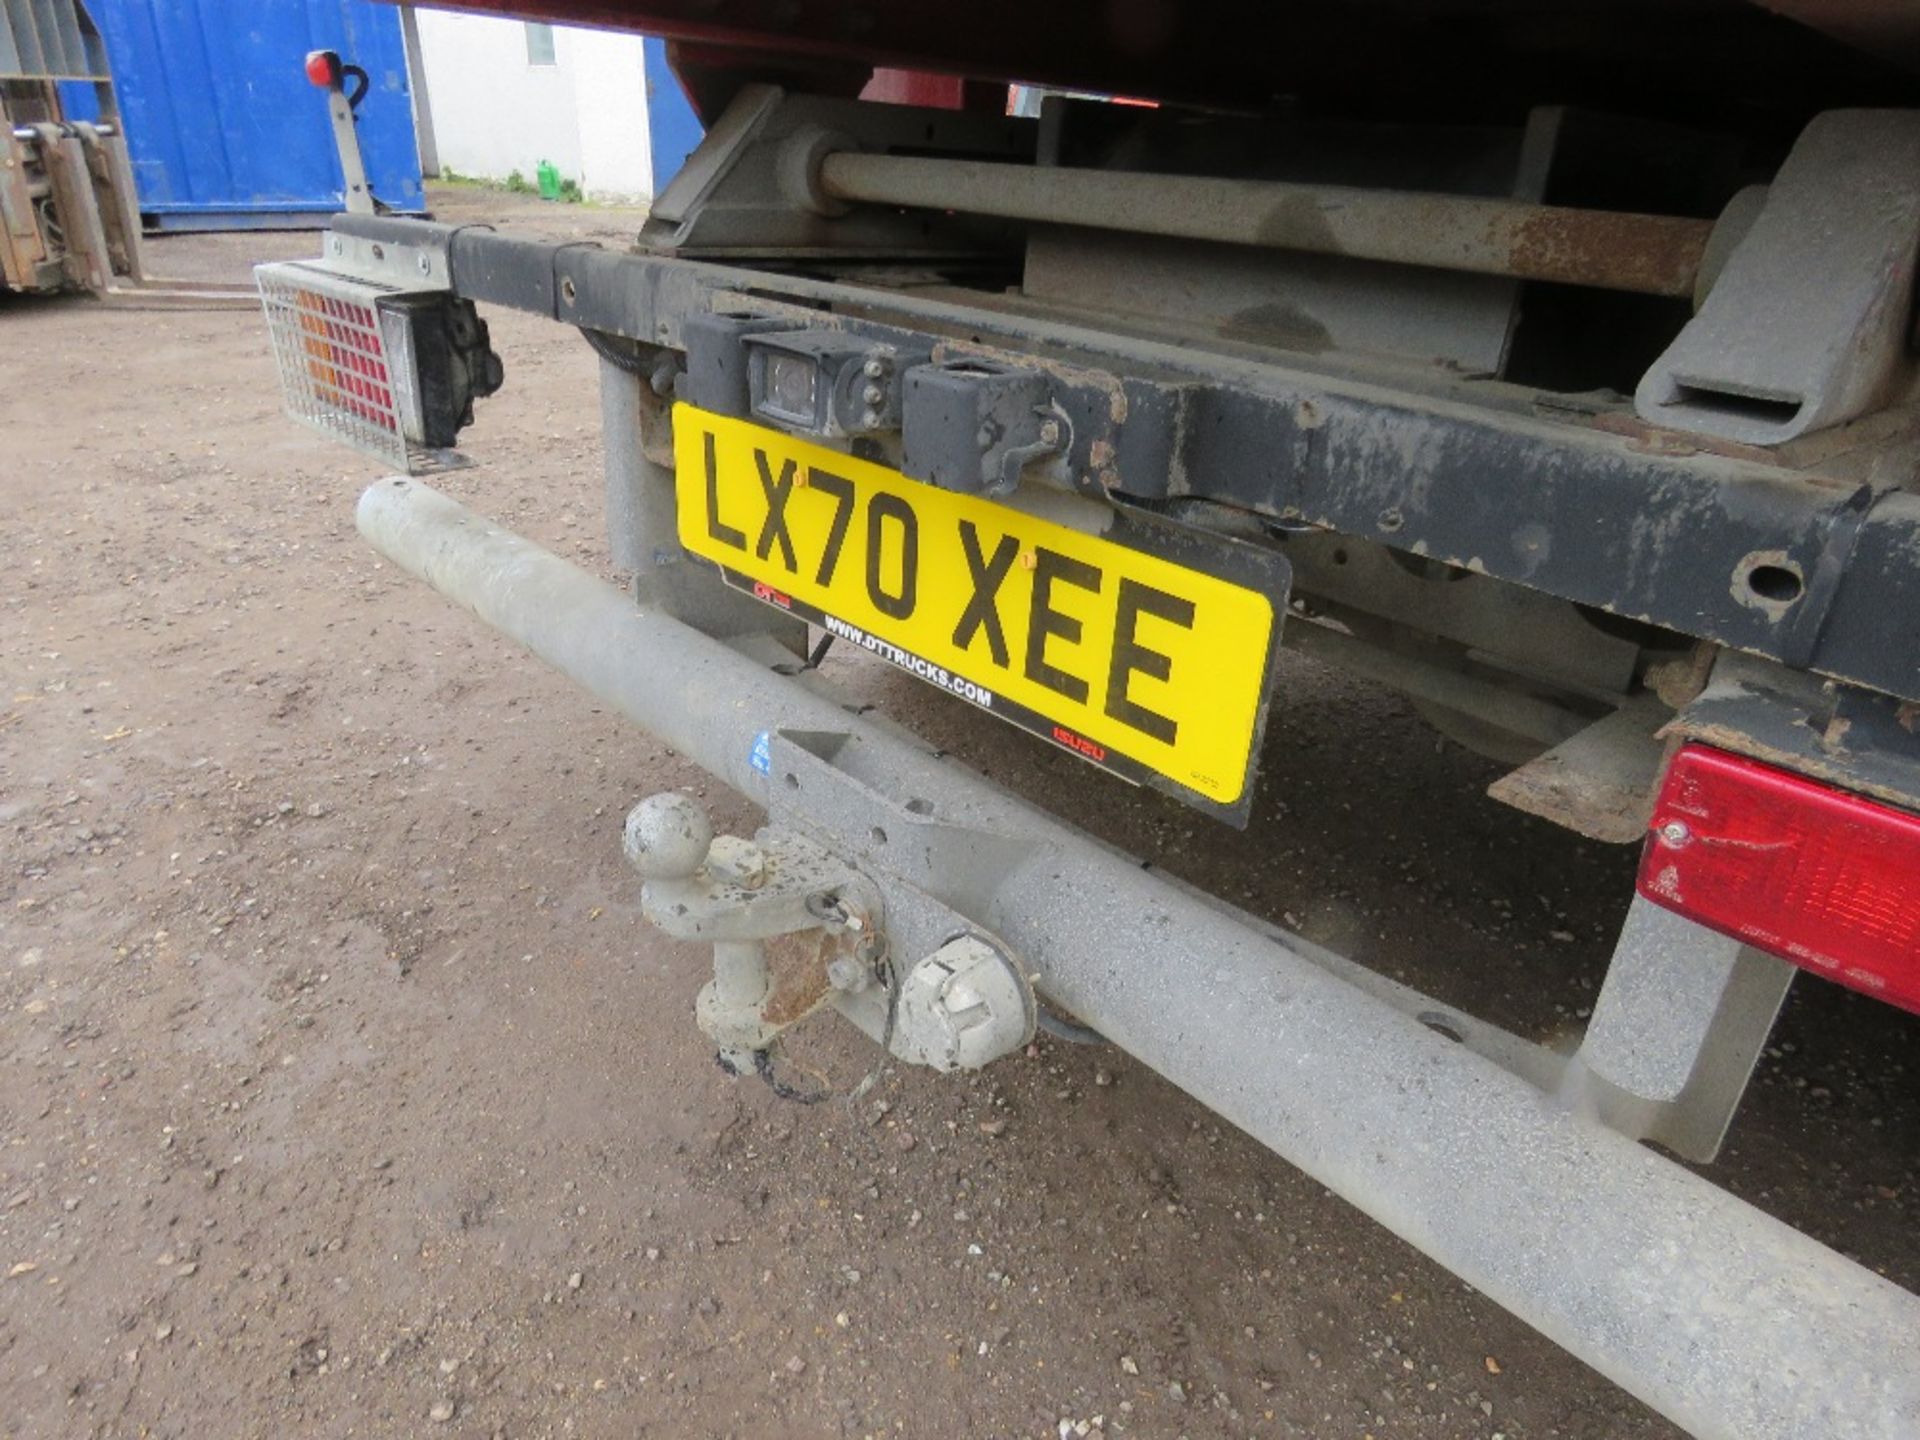 ISUZU N75.150 TIPPER LORRY REG:LX70 XEE. WITH V5, ONE RECORDED KEEPER, D.O.R:01/09/20. SOURCED FROM - Image 19 of 19